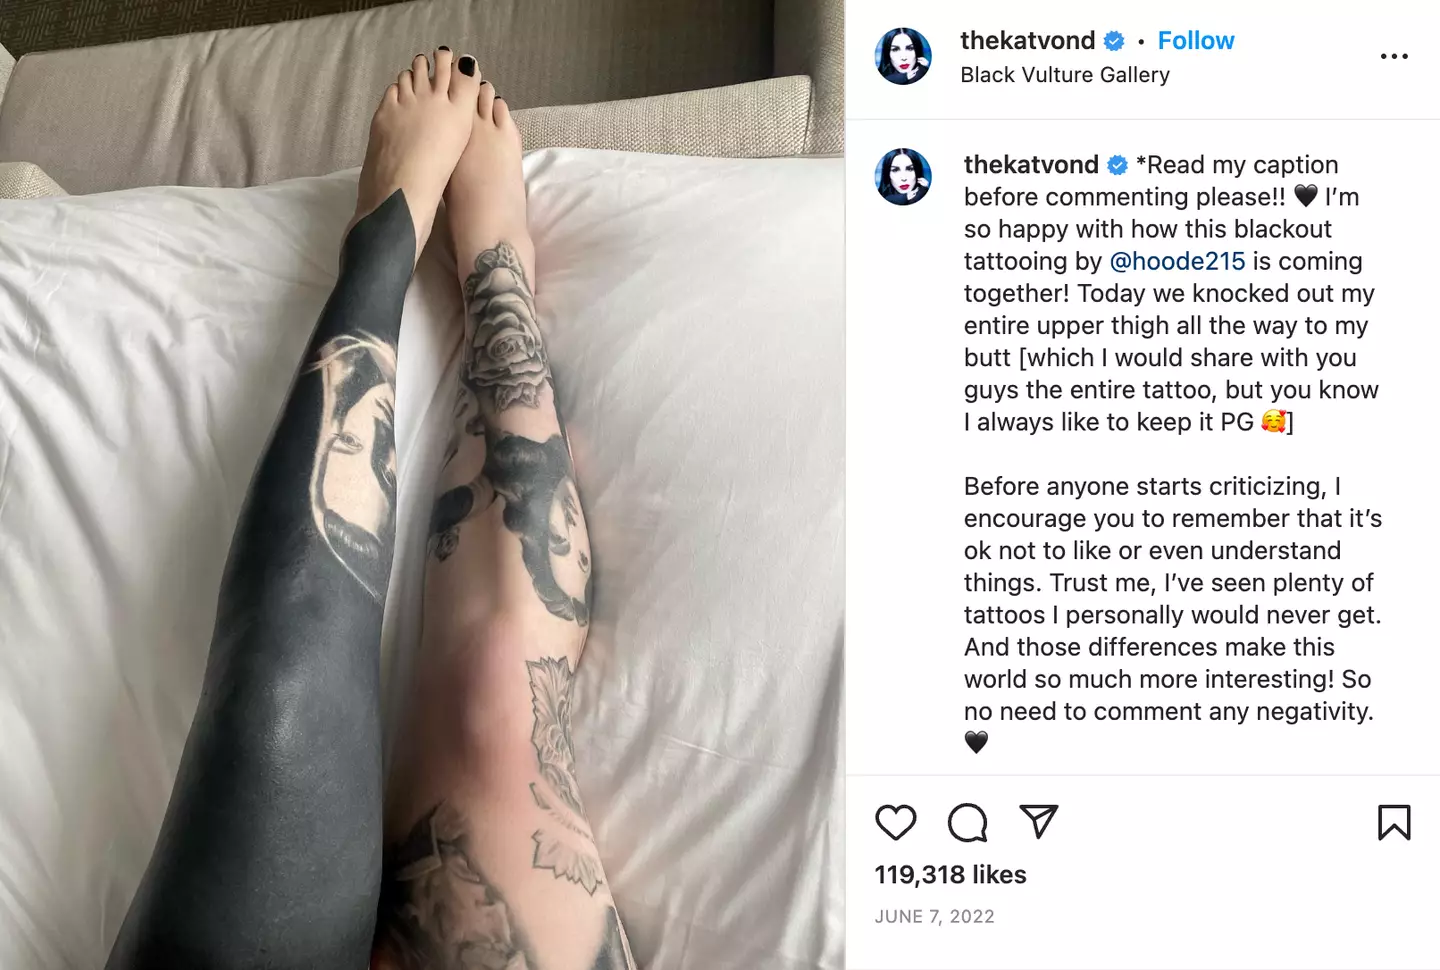 Kat Von D has made some major changes to her life in recent years.